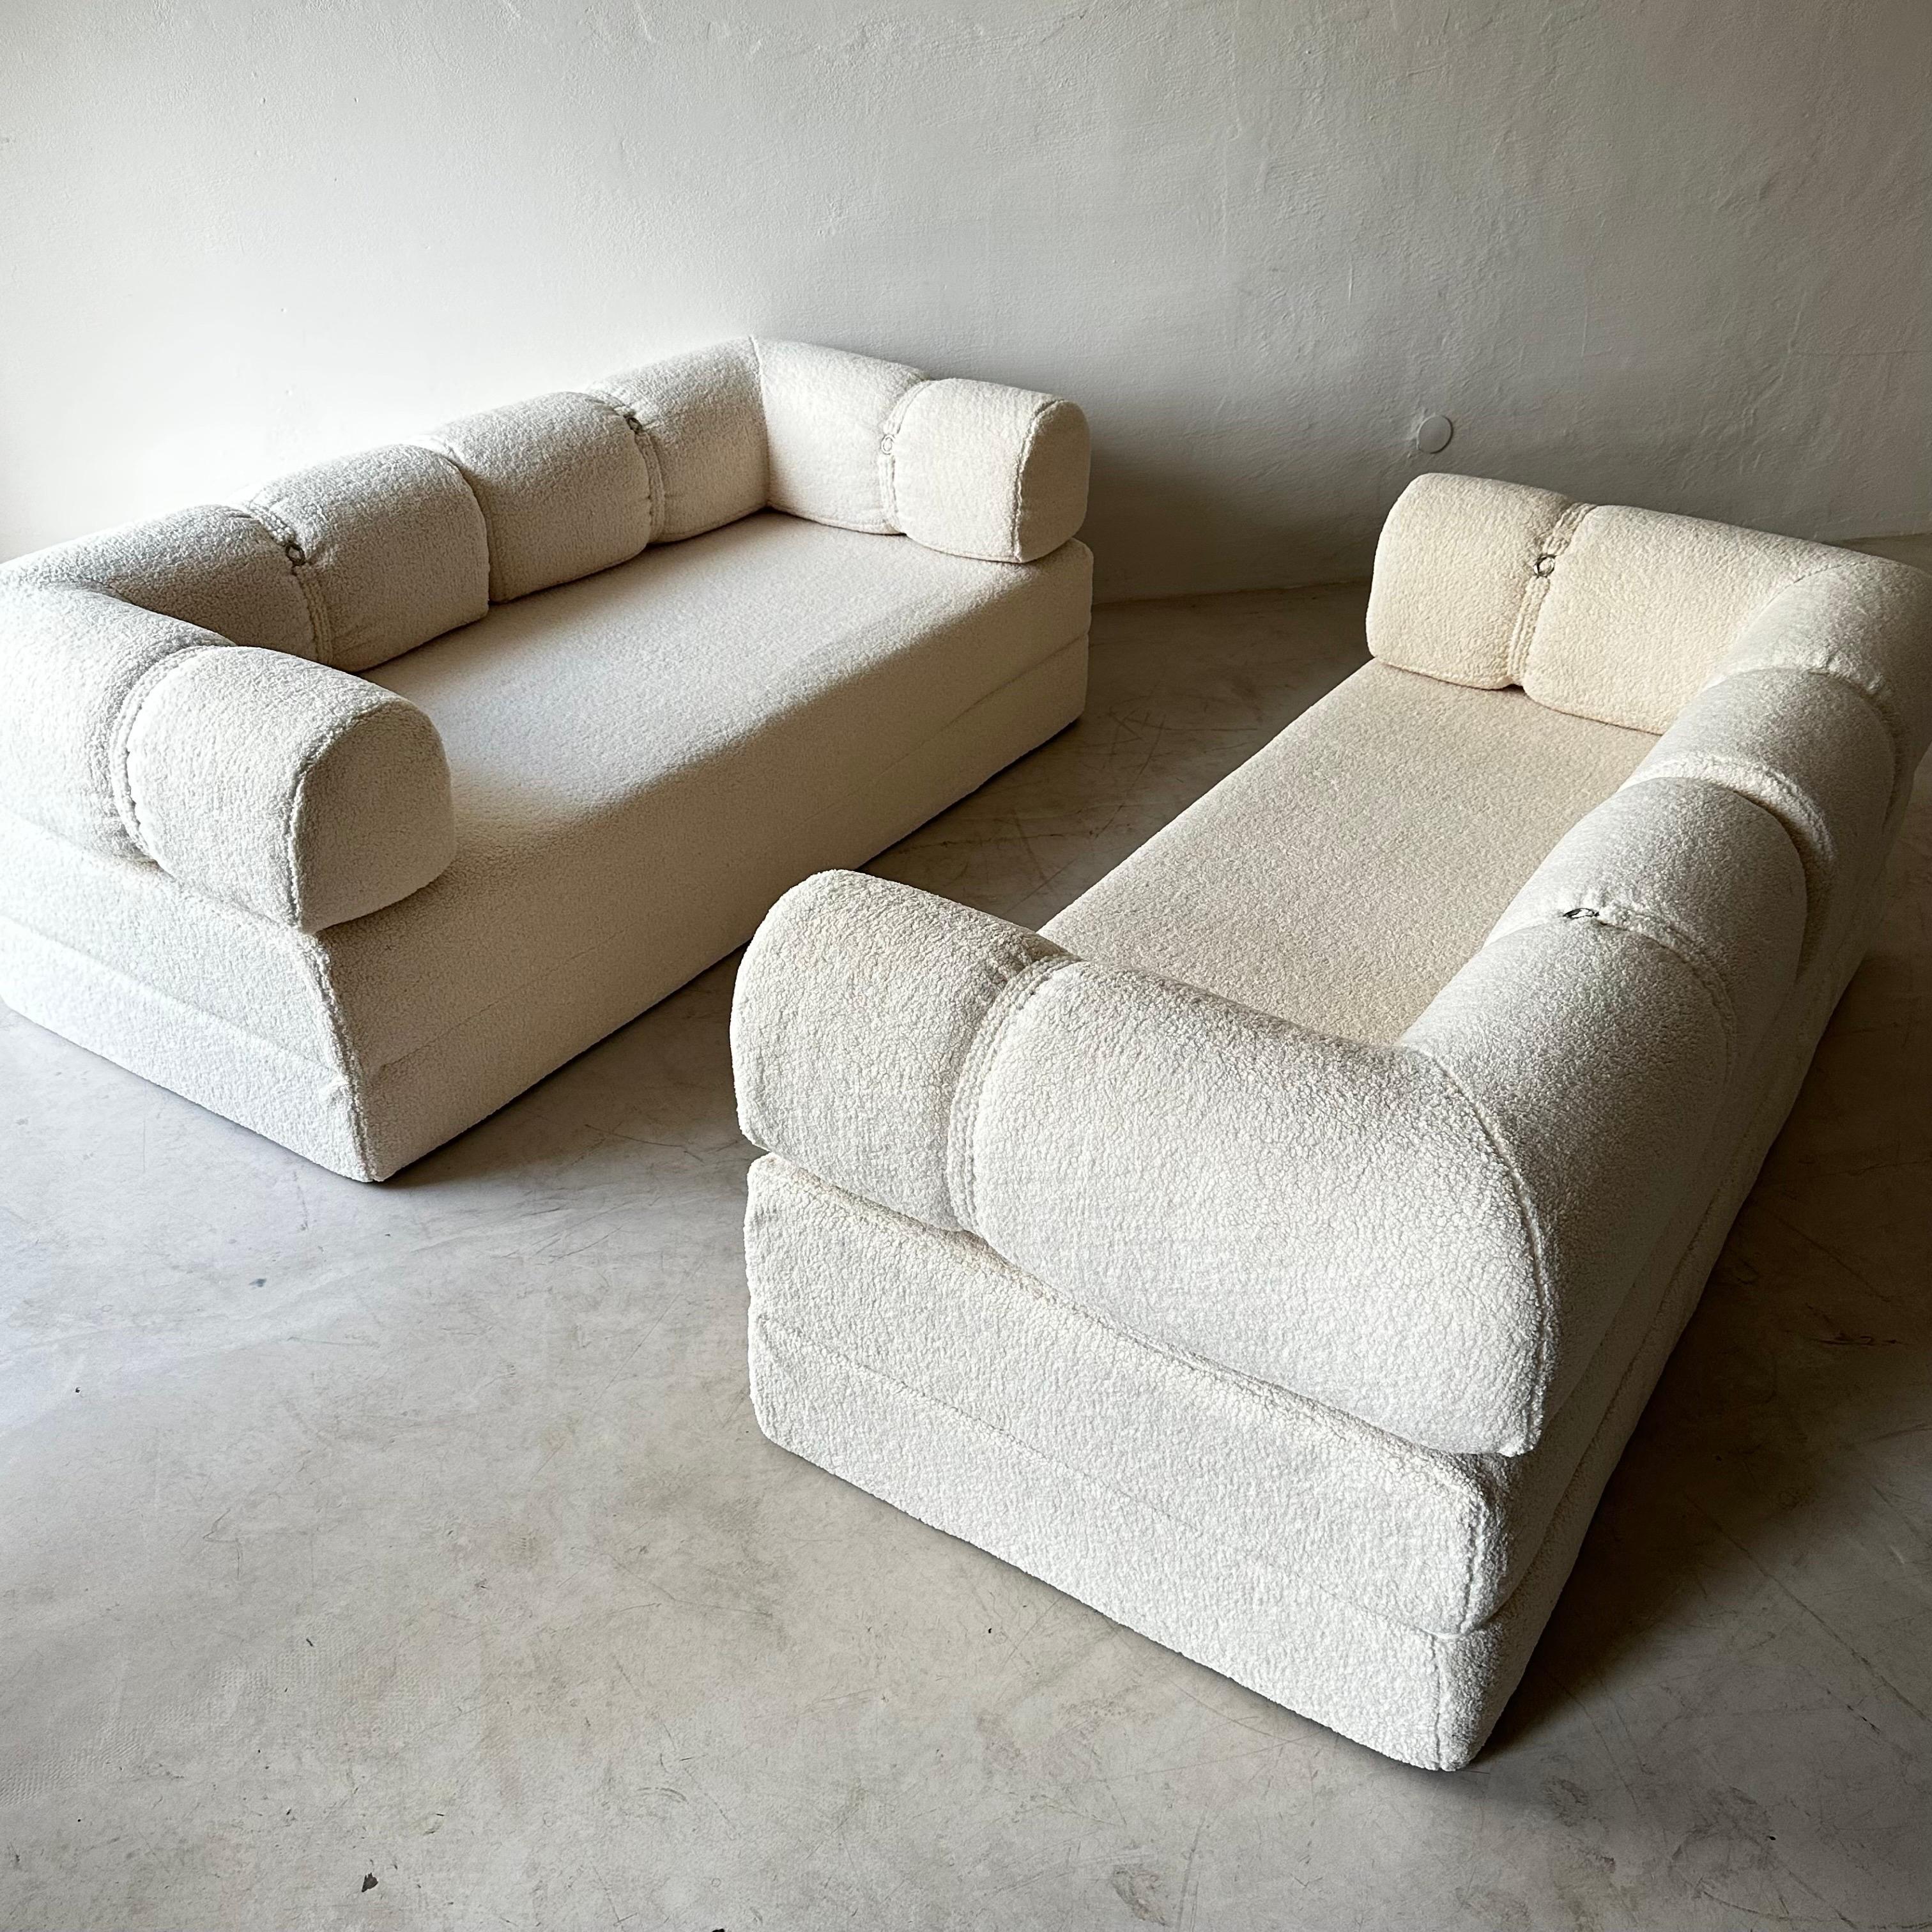 Mario Bellini Style Sofa's Daybeds Two Pieces Available, Italy, 1970s For Sale 1